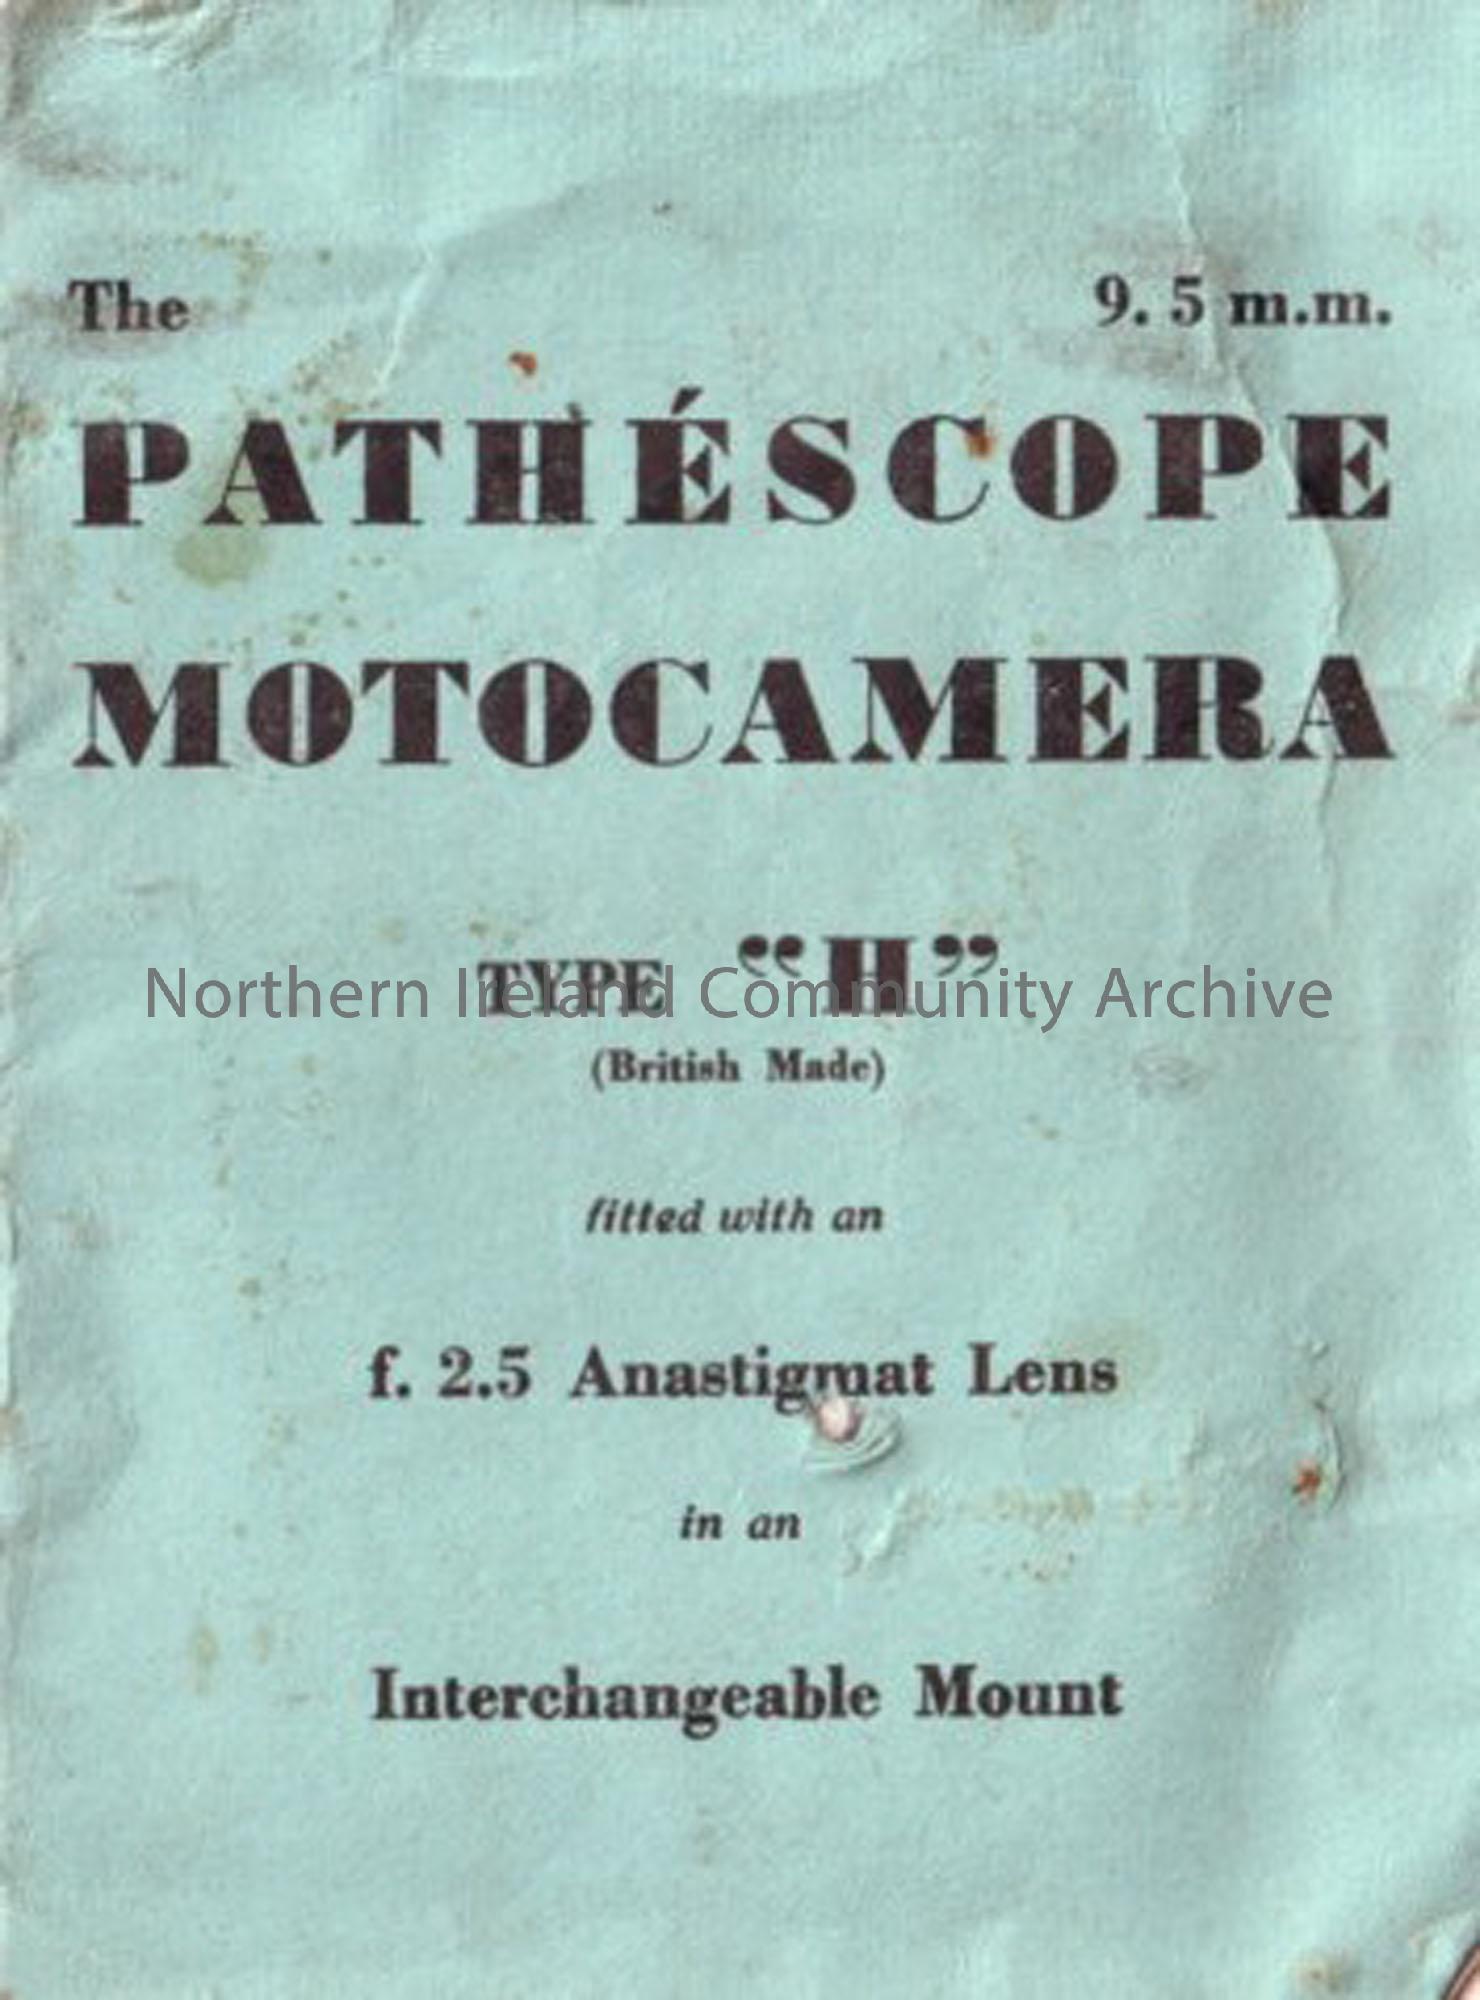 Instruction booklet for The Pathescope Motocamera Type ‘H’